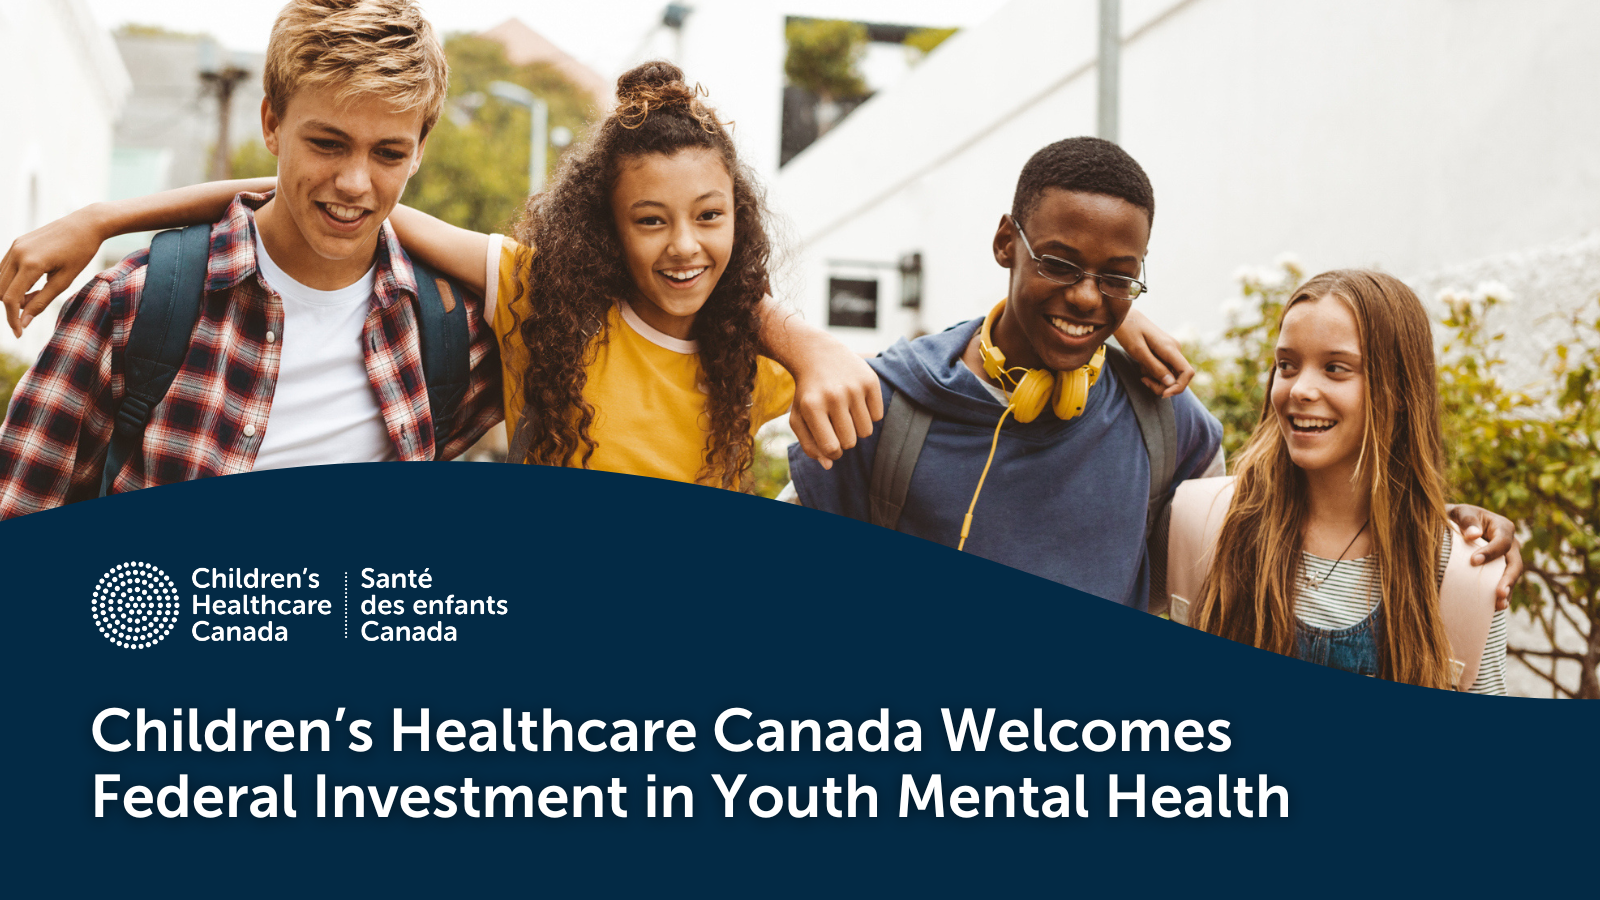 A group of happy youth with their arms over each others shoulders. The graphic has the Children's Healthcare Canada logo and text that reads "Children’s Healthcare Canada Welcomes Federal Investment in Youth Mental Health".